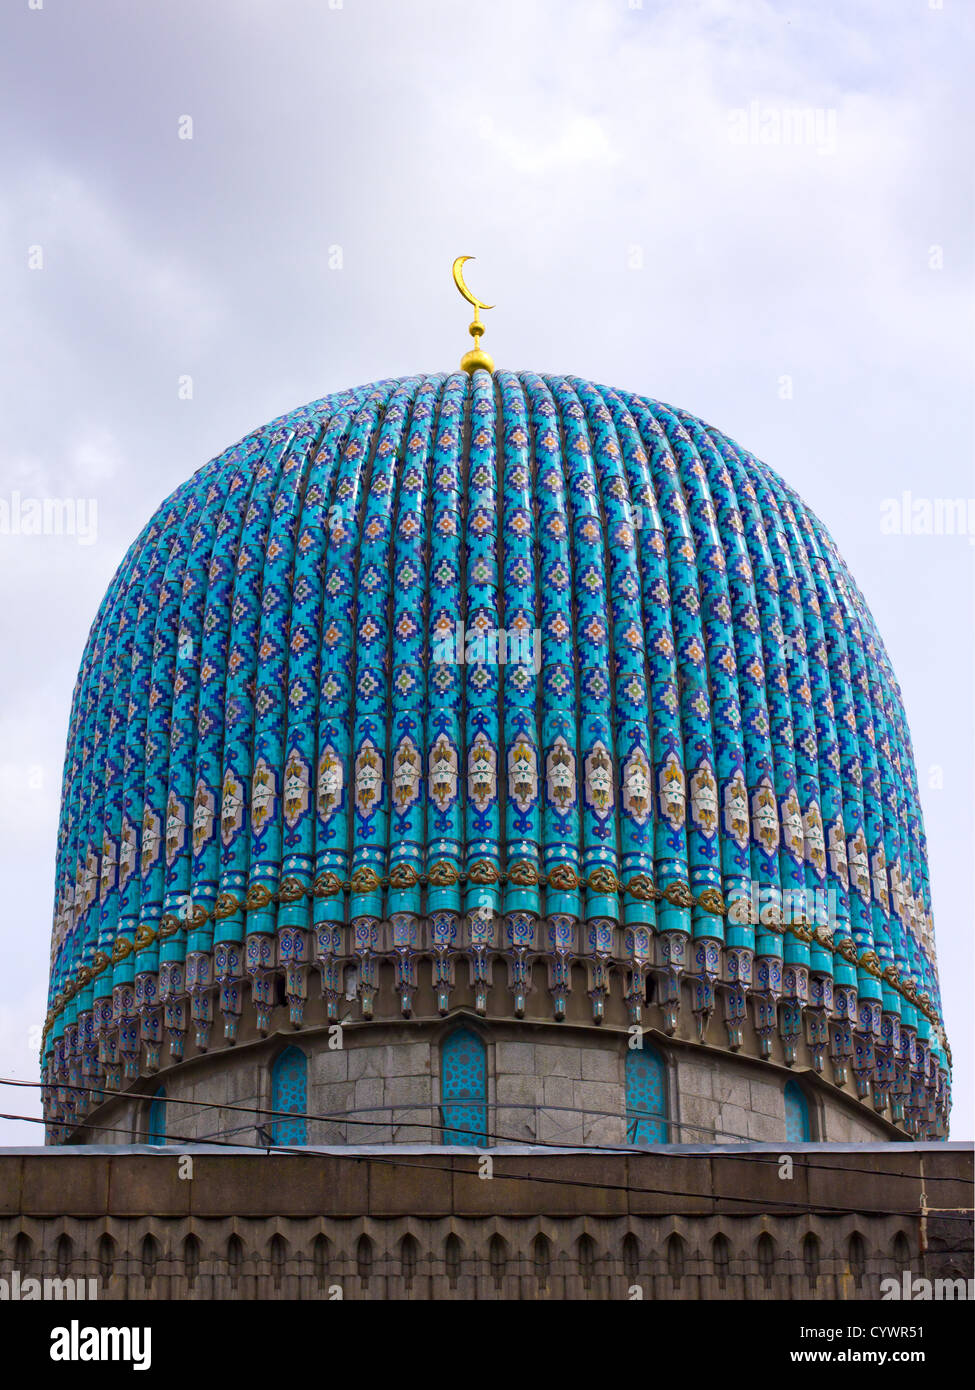 dome of the Cathedral Mosque of St. Petersburg, Russia Stock Photo